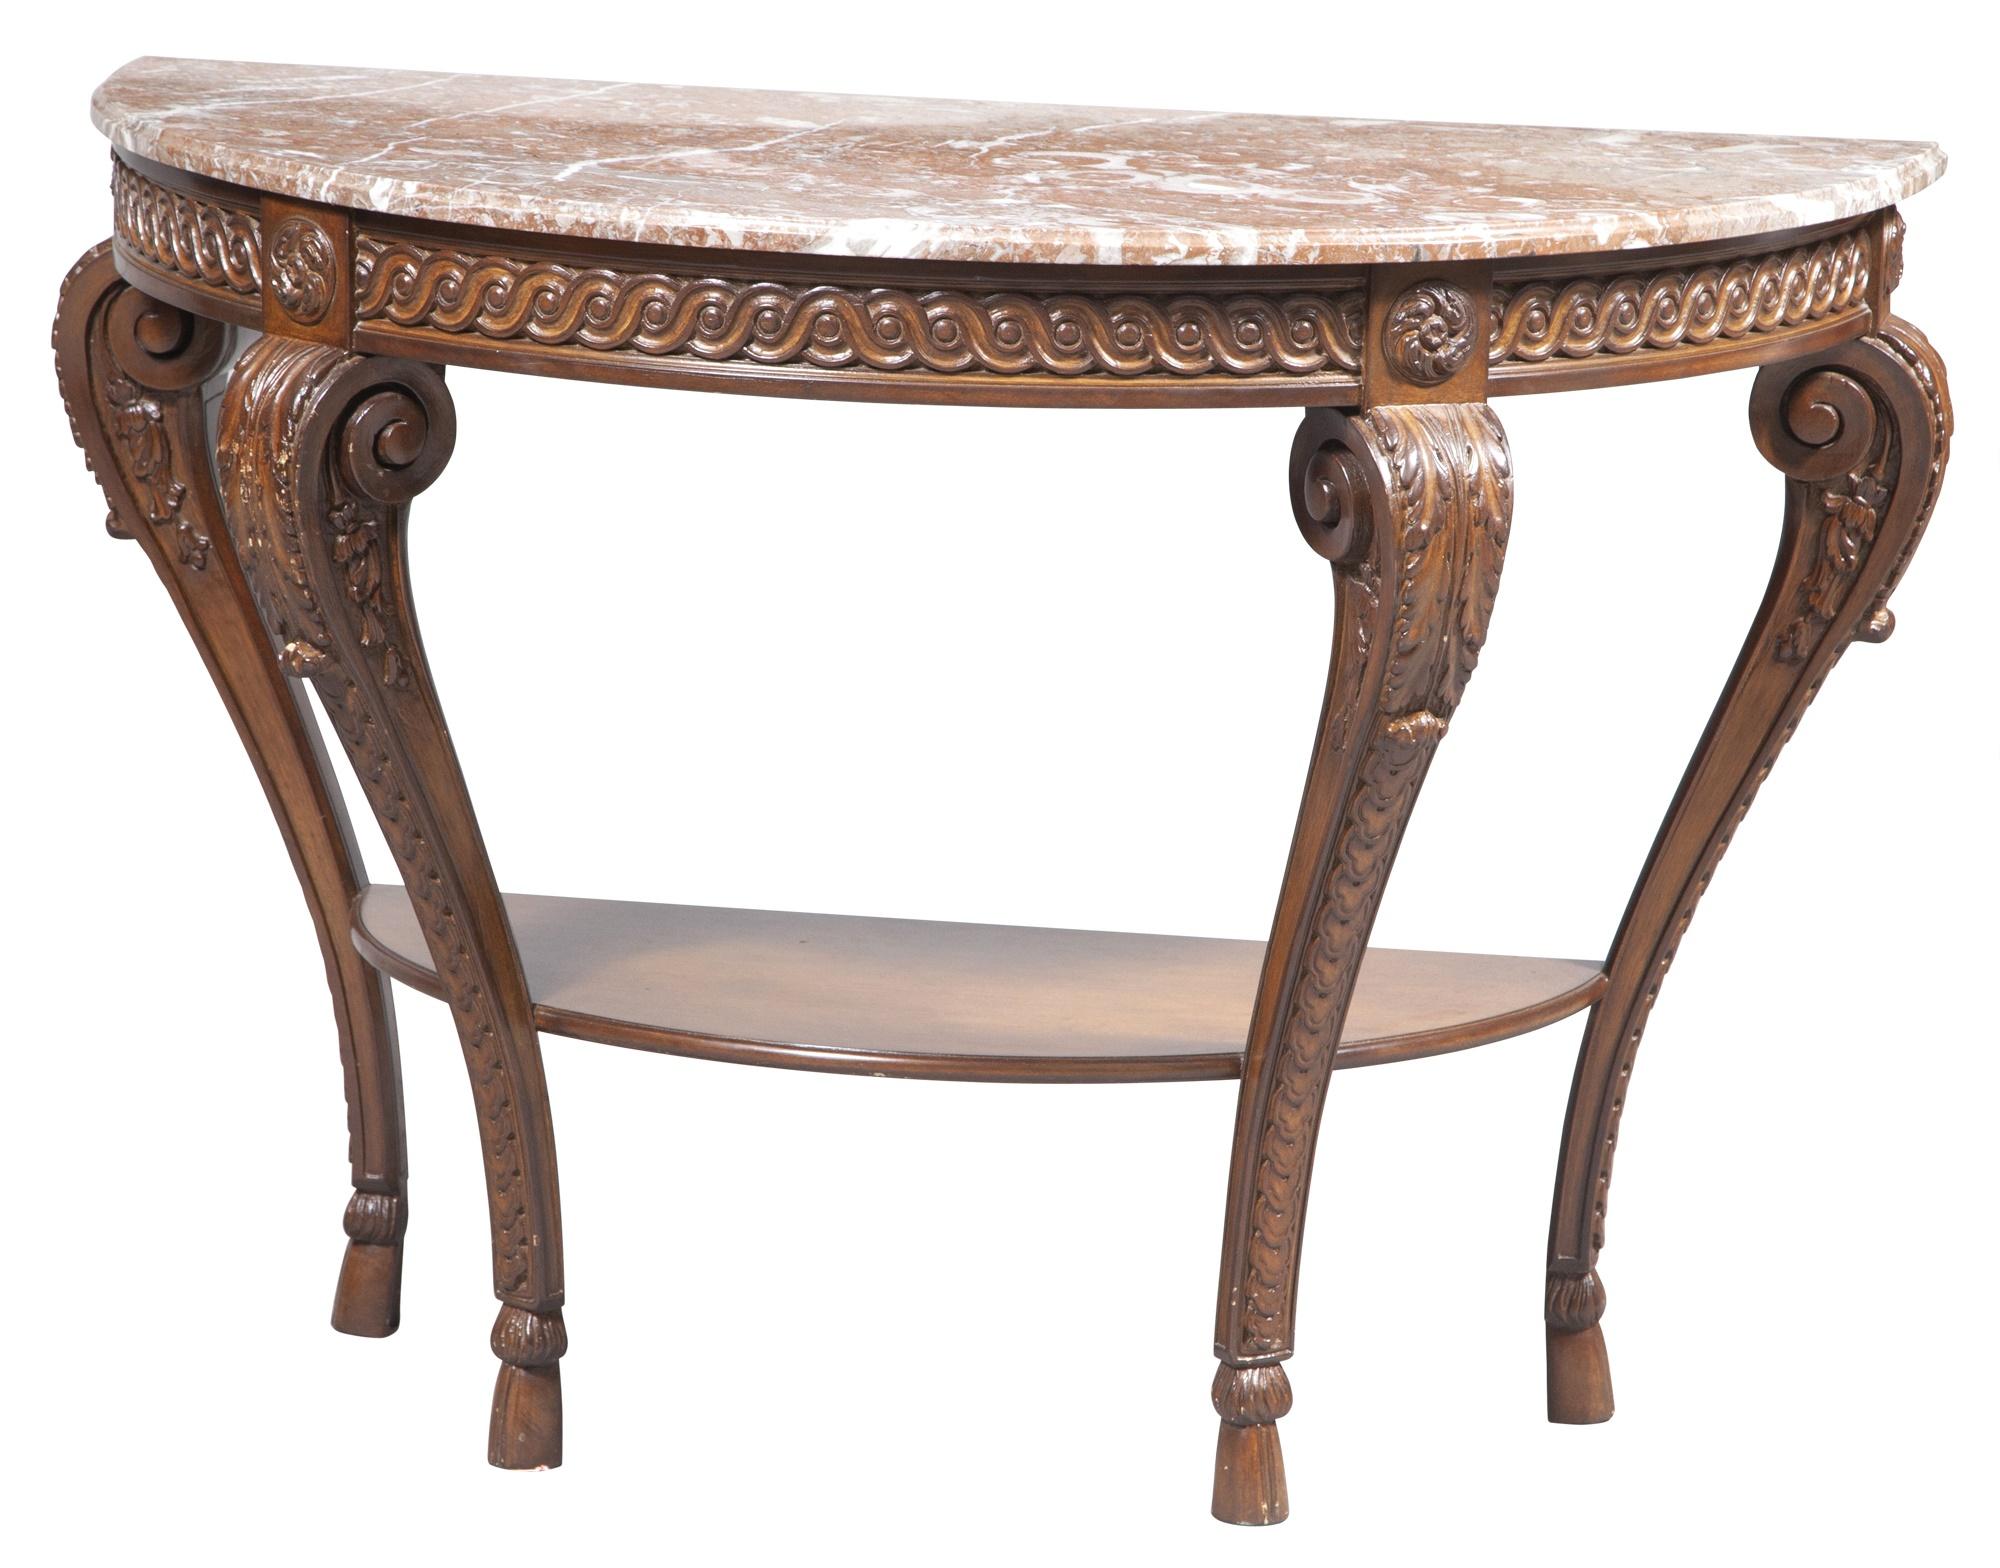  Louis XVI Style Walnut Framed Marble Top Demilune Console Table For Sale 3